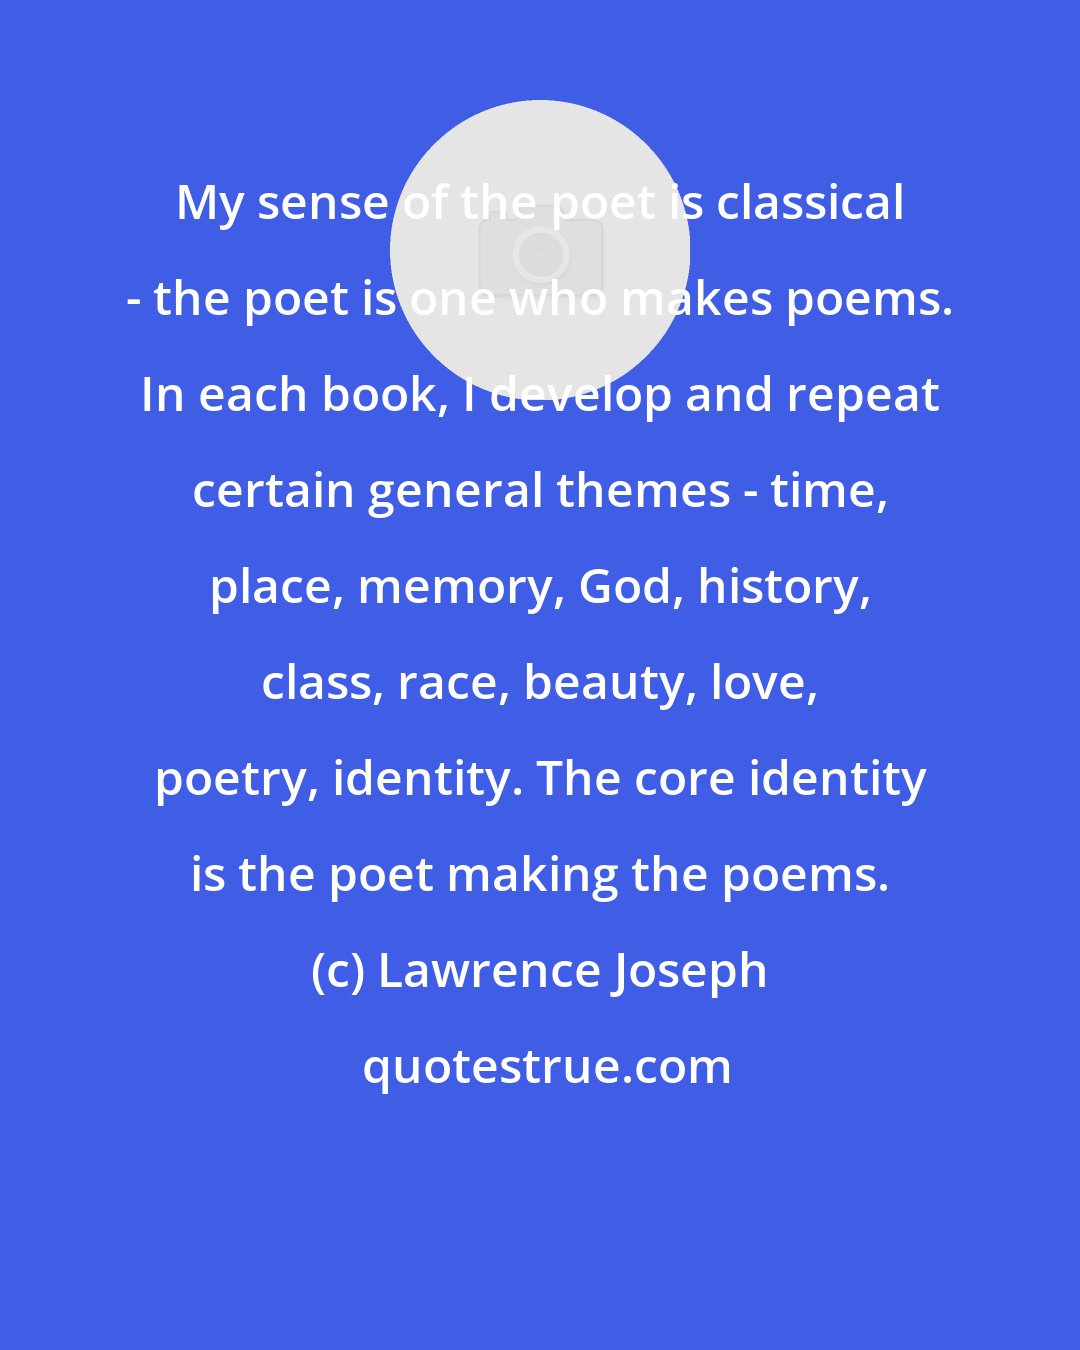 Lawrence Joseph: My sense of the poet is classical - the poet is one who makes poems. In each book, I develop and repeat certain general themes - time, place, memory, God, history, class, race, beauty, love, poetry, identity. The core identity is the poet making the poems.